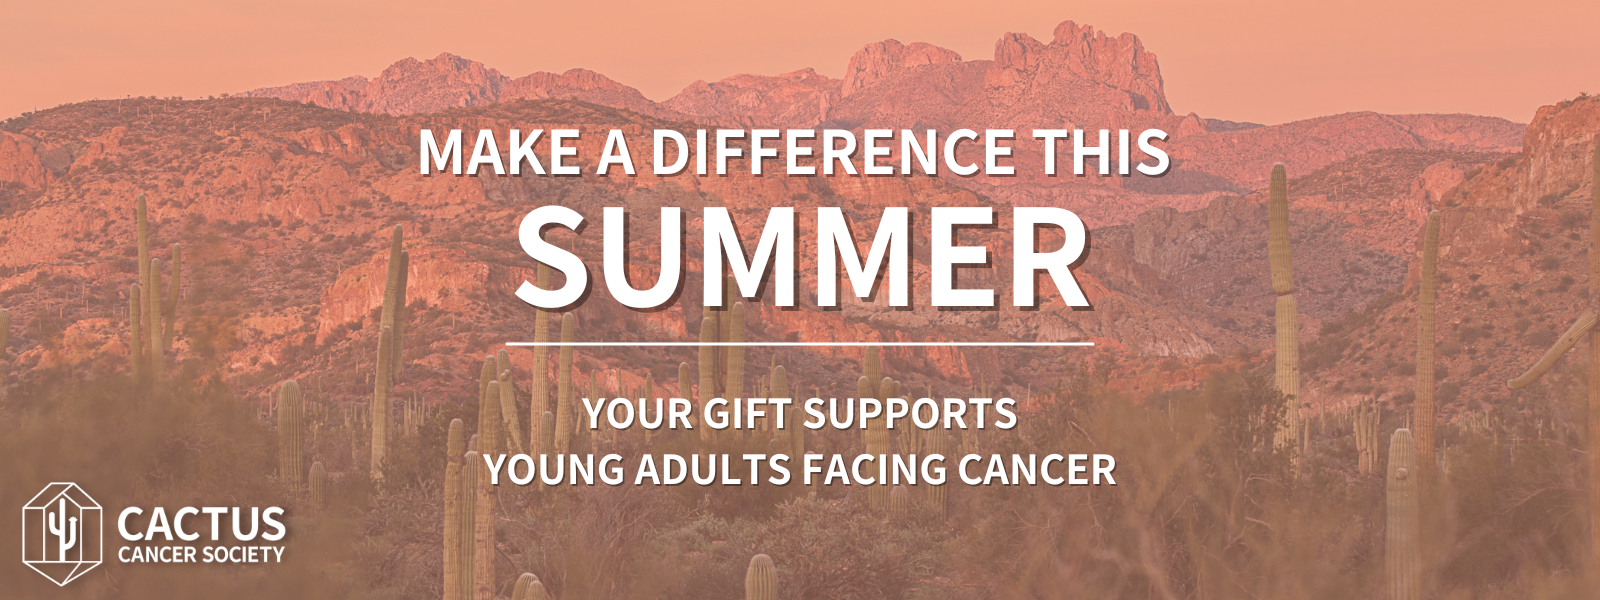 Make a difference this summer! Donate to support young adults facing cancer.